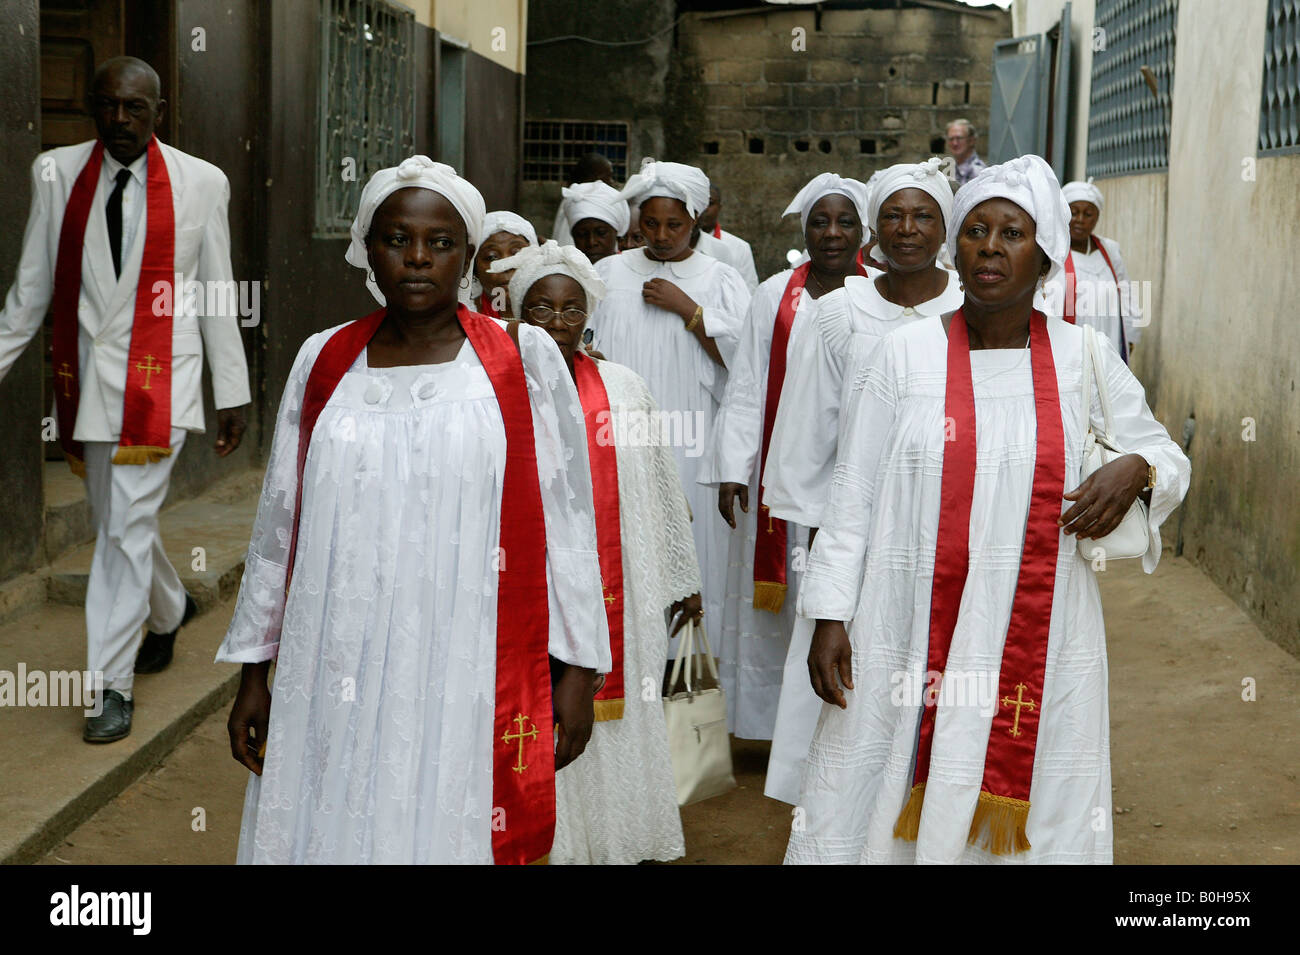 Women dressed in white robes and red sashes at a church service in Douala, Cameroon, Africa Stock Photo